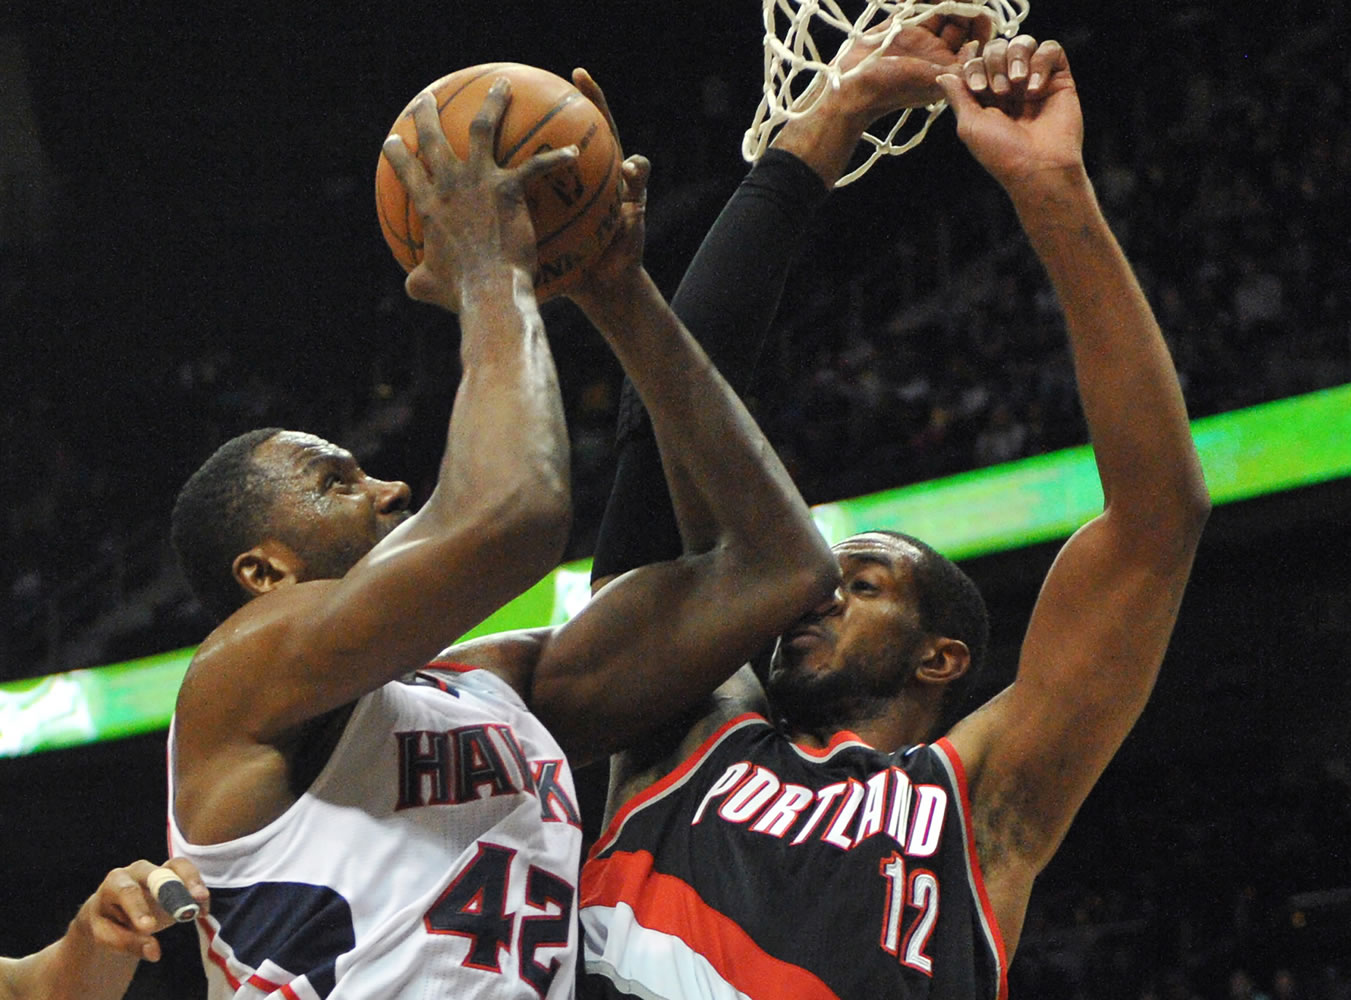 Portland Trail Blazers ' LaMarcus Aldridge (12) gets an elbow to the nose as Atlanta Hawks' Elton Brand (42) shoots in the first half of their NBA basketball game Thursday, March 27, 2014, in Atlanta.